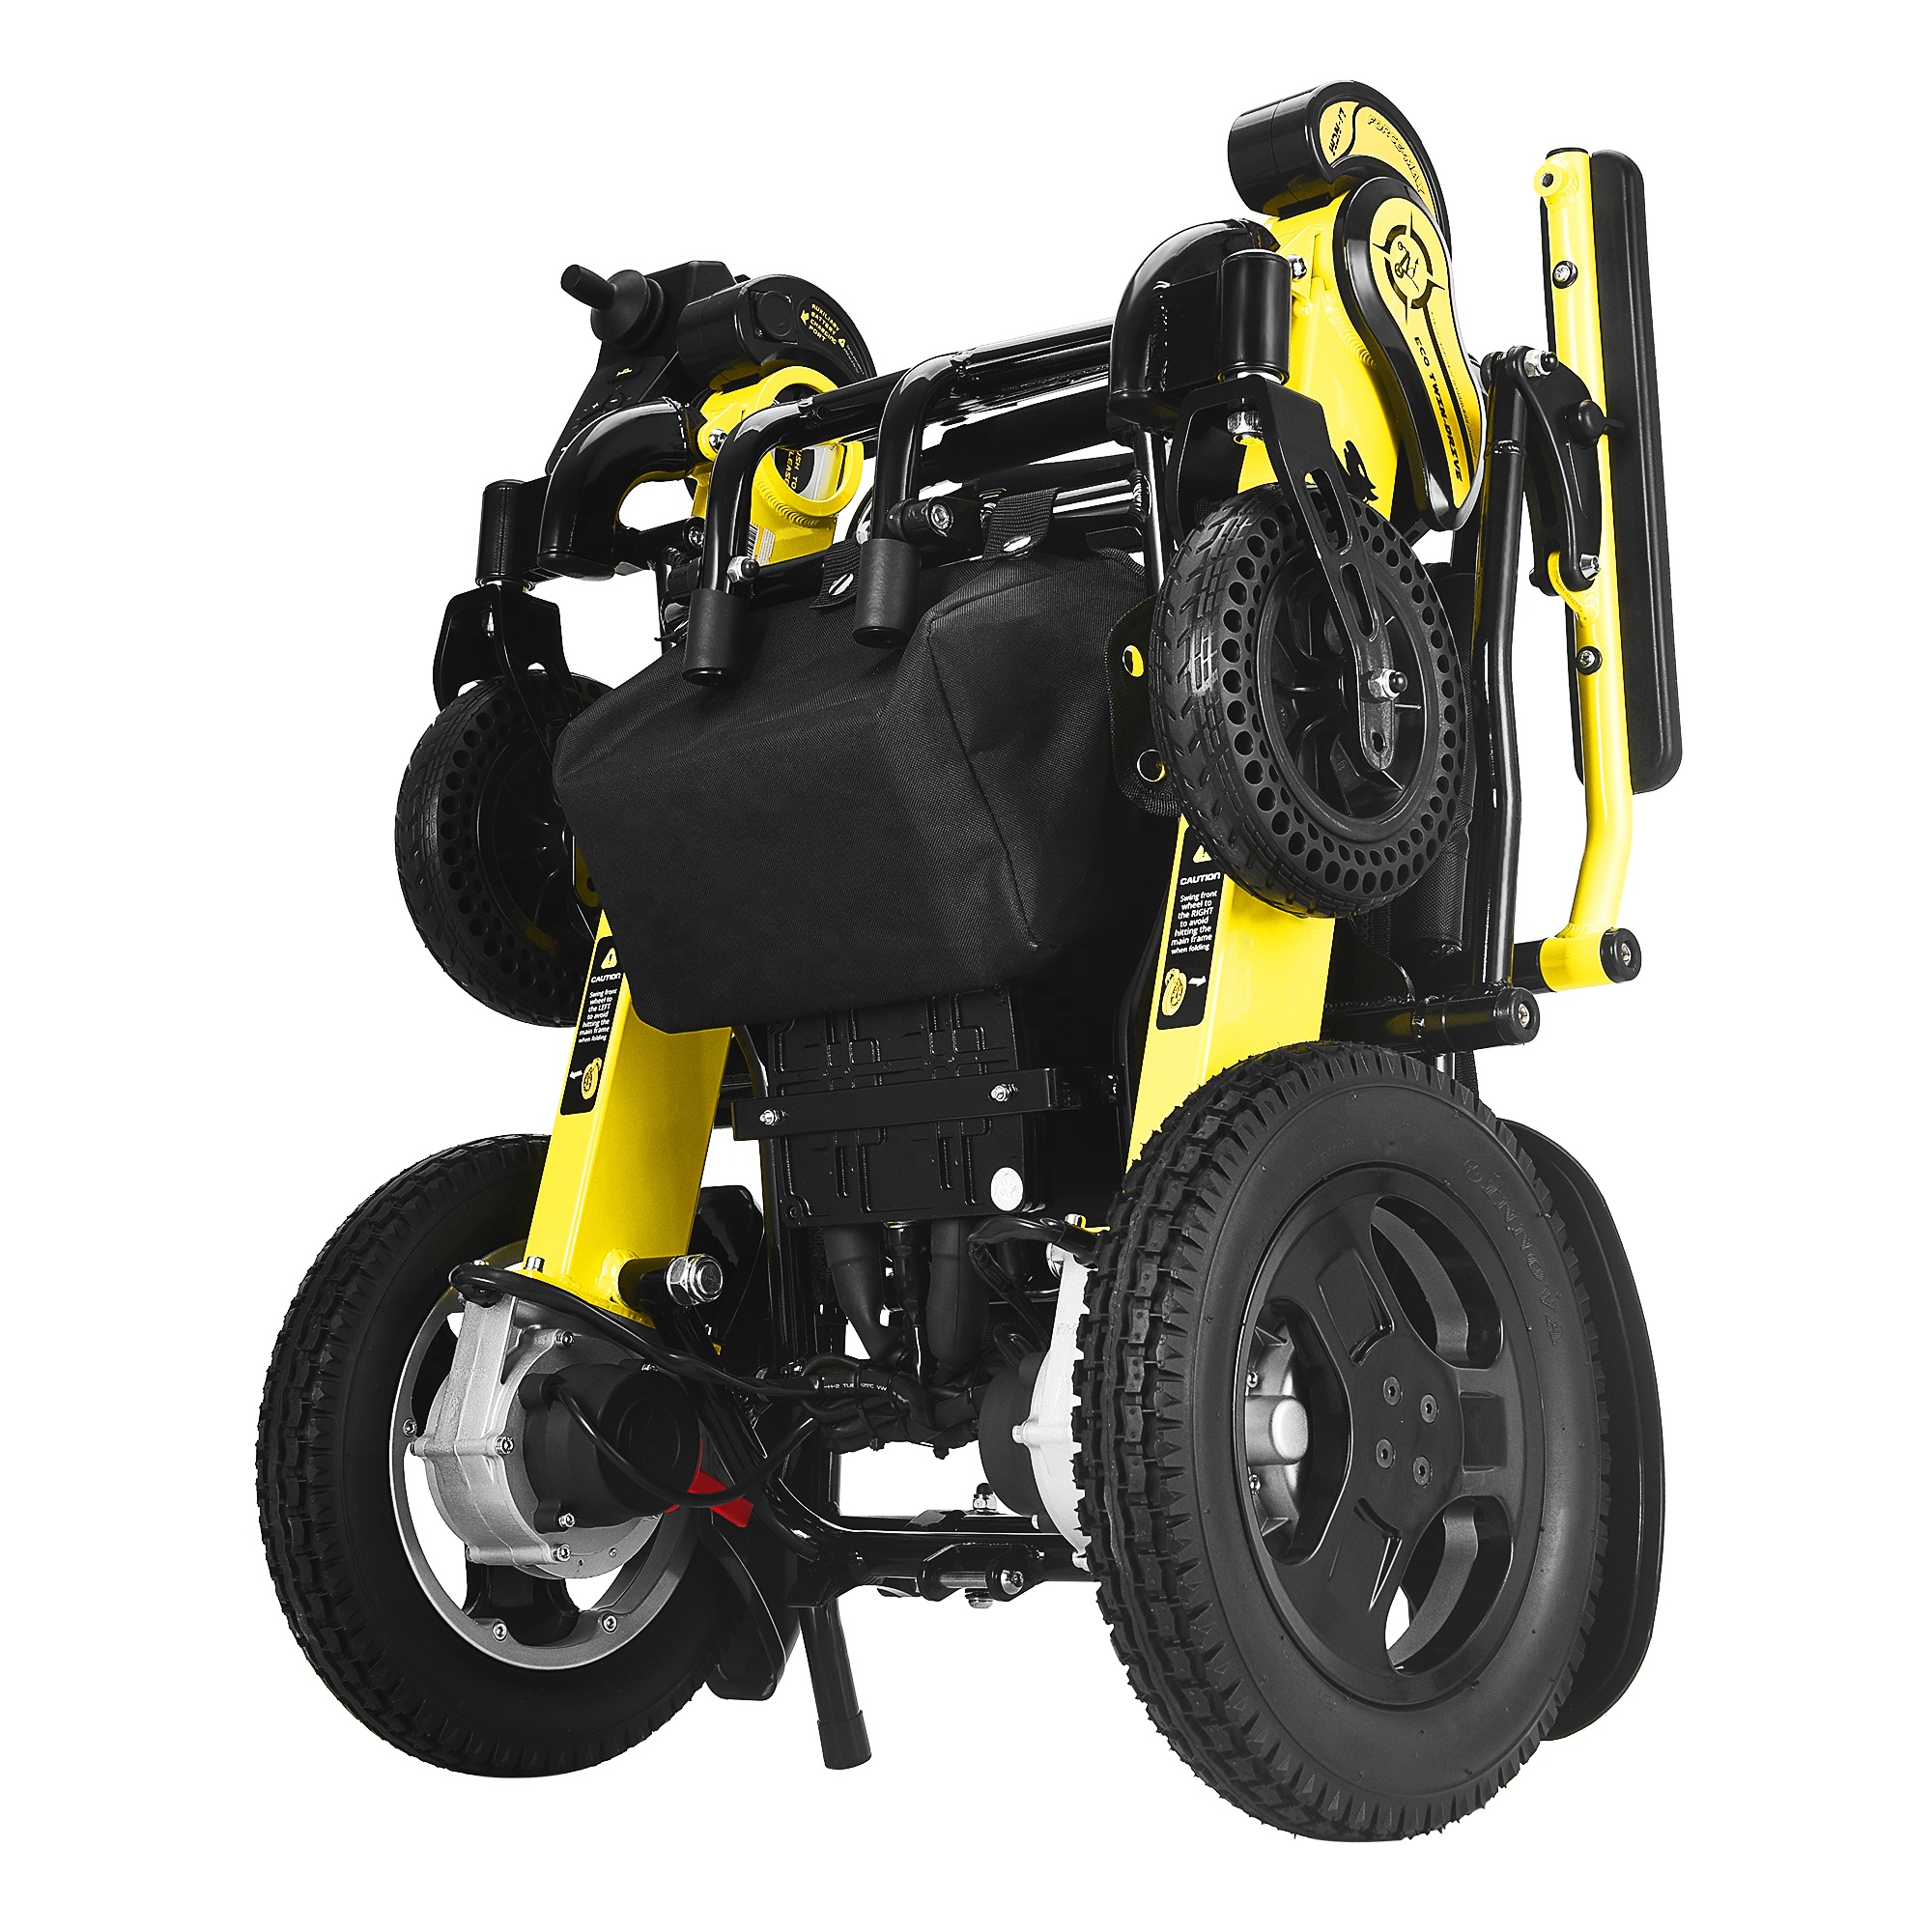 What issues should be noted when selecting a portable electric wheelchair supplier